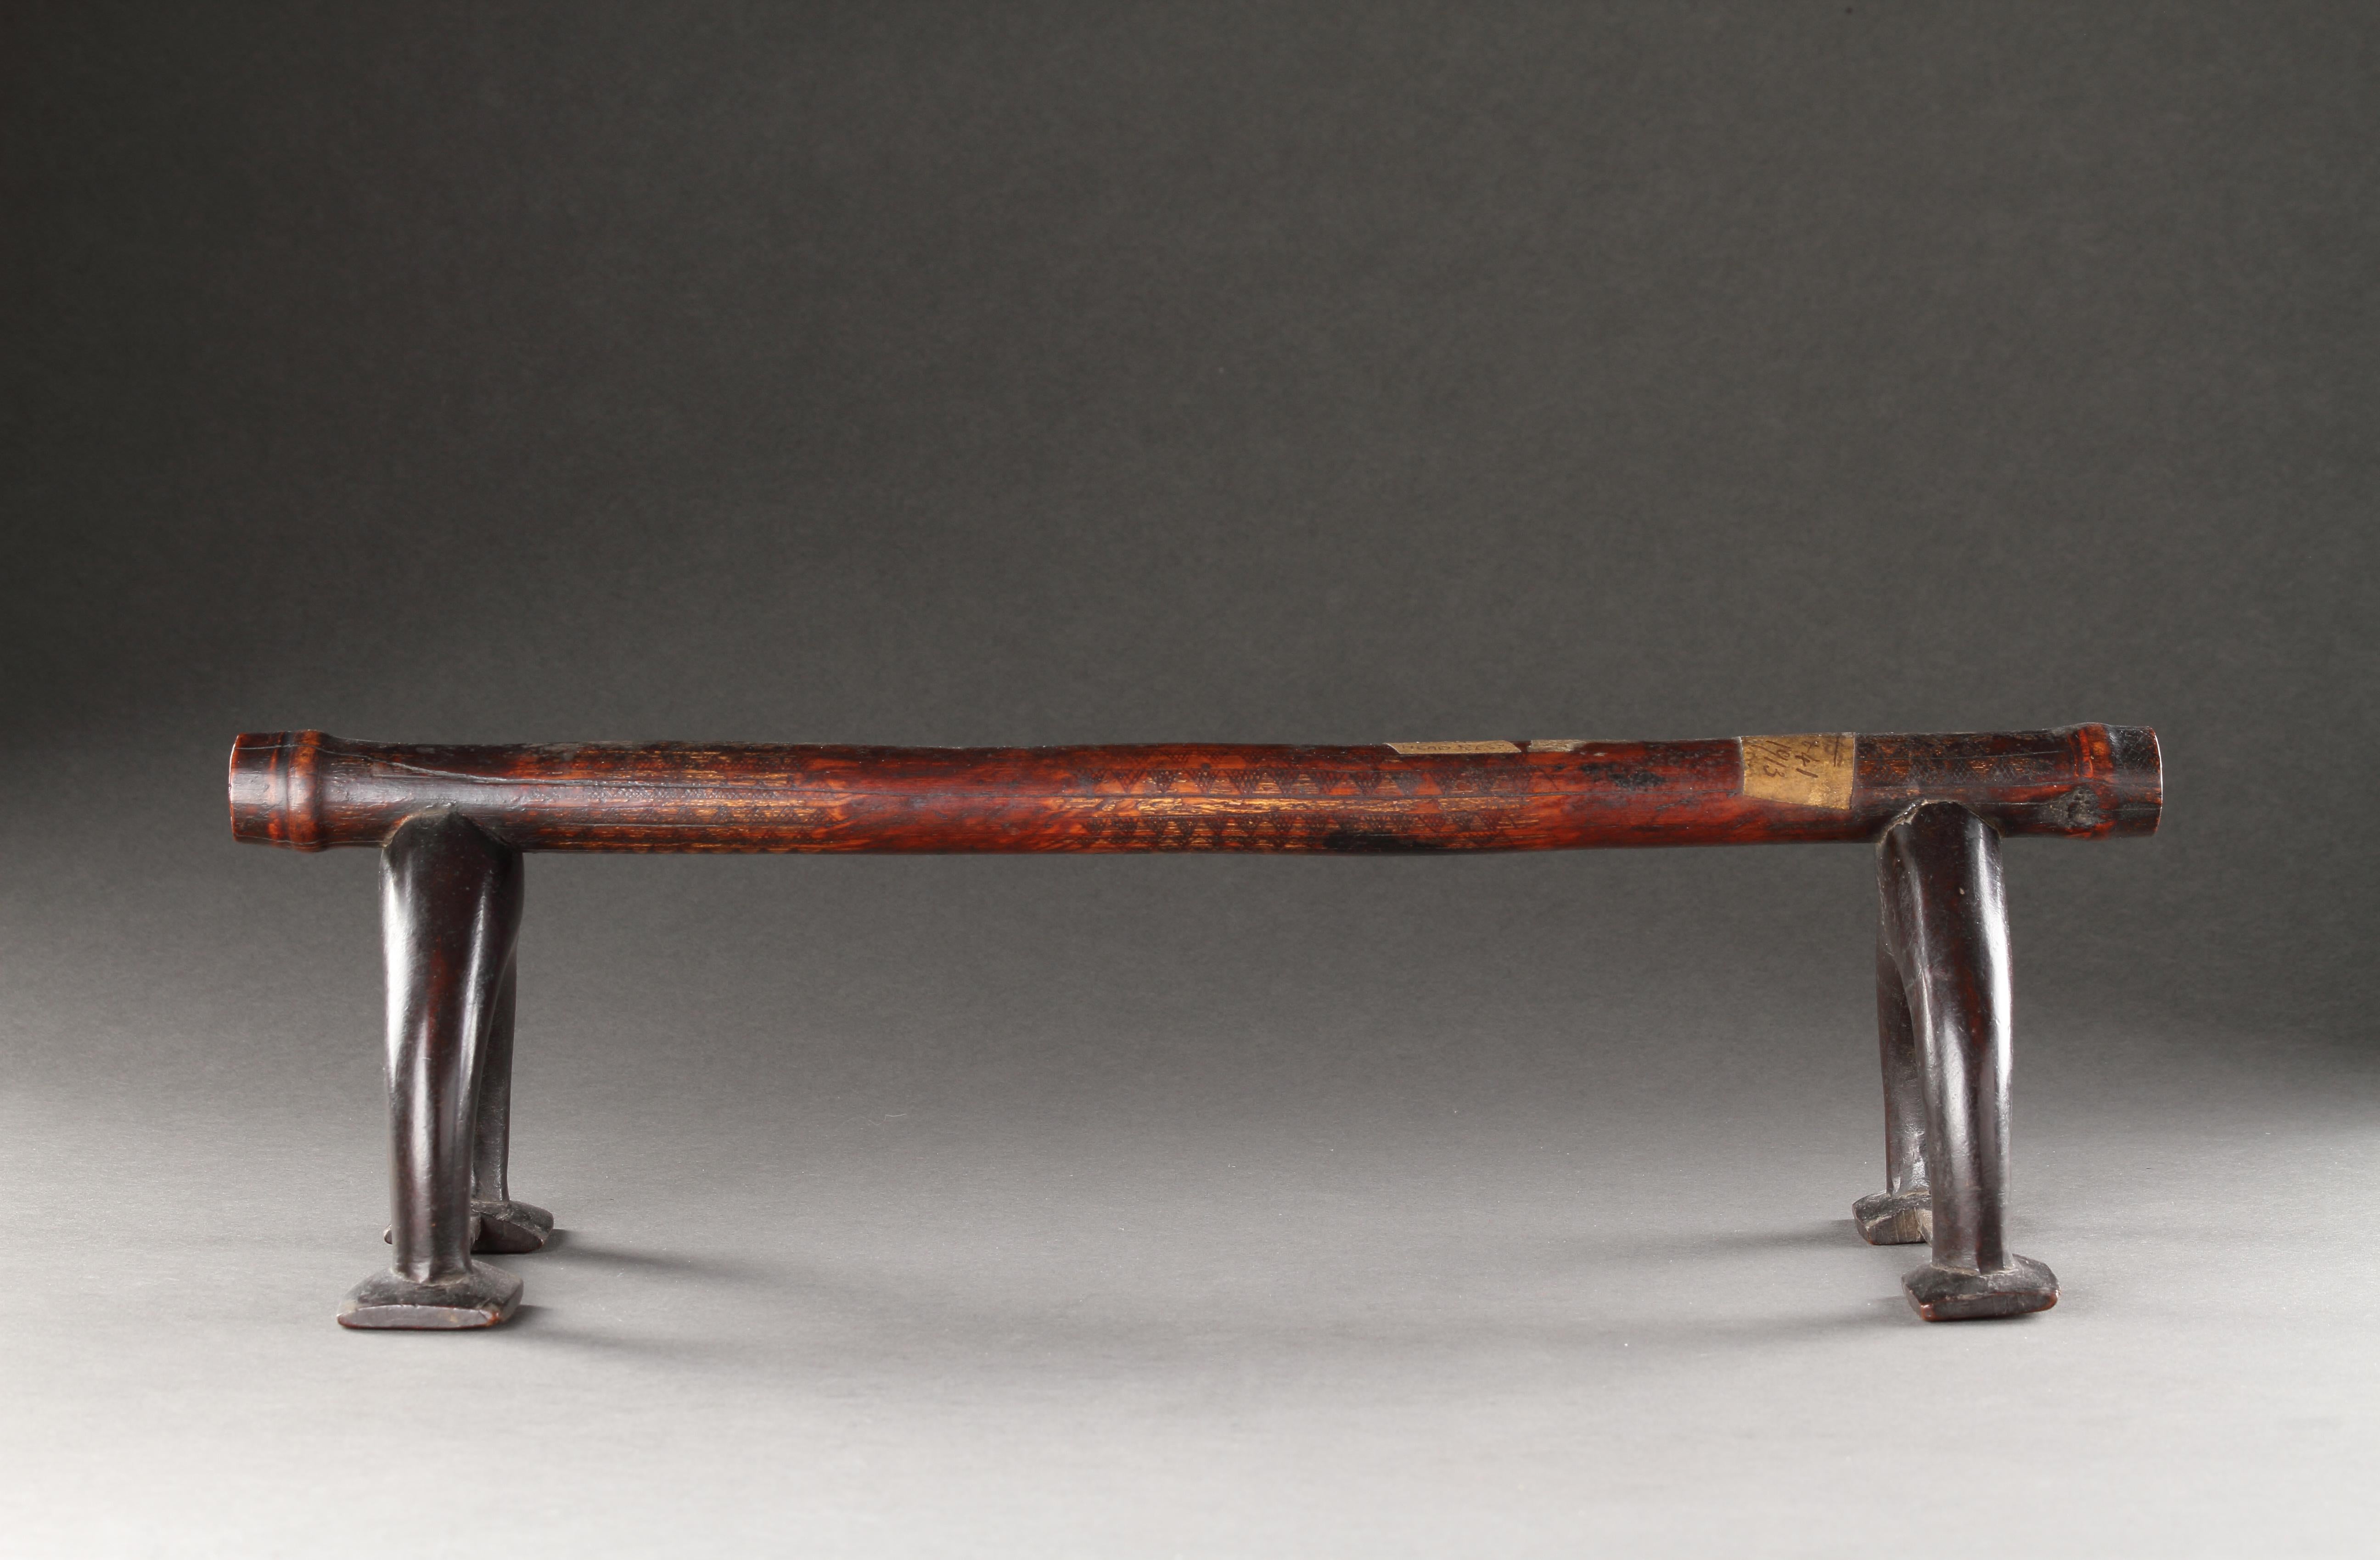 19th Century A Very Fine and Rare Headrest ‘Kali’ or ‘Kalimasi’ / ‘Kali Toloni’ For Sale